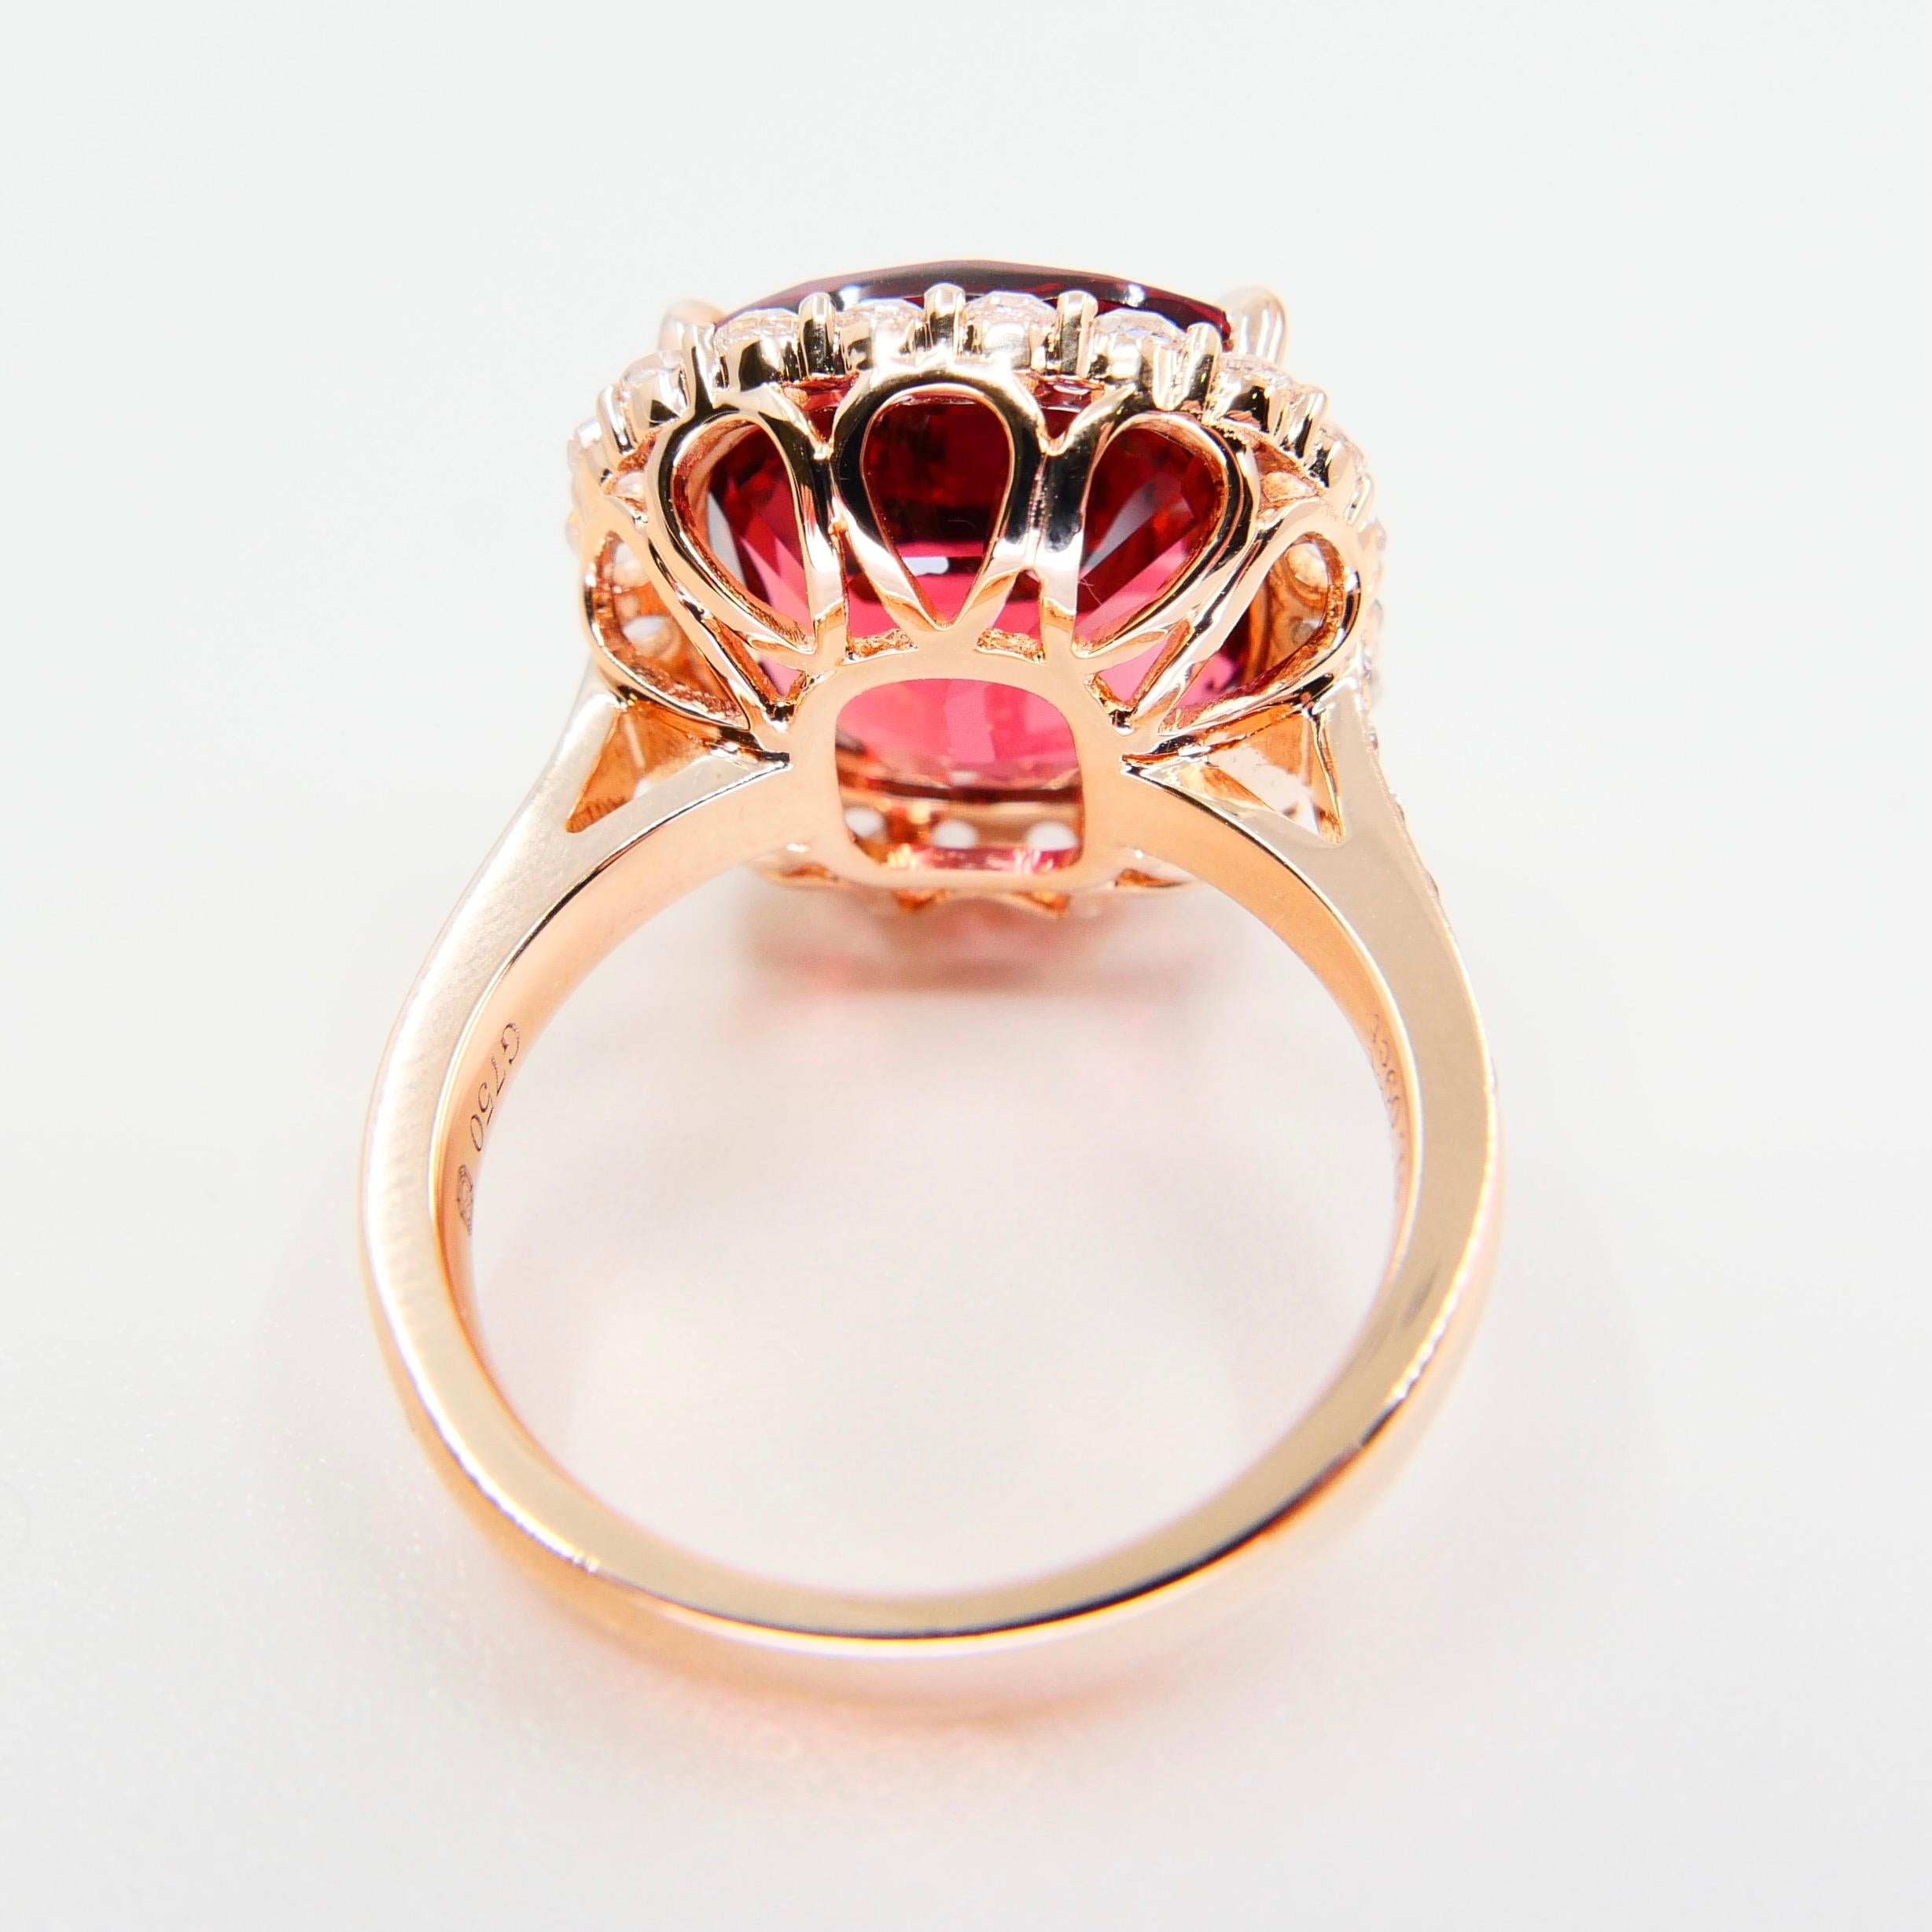 GIA Certified 11.55 Cts Orange Pink Tourmaline & Rose Cut Diamond Cocktail Ring For Sale 2